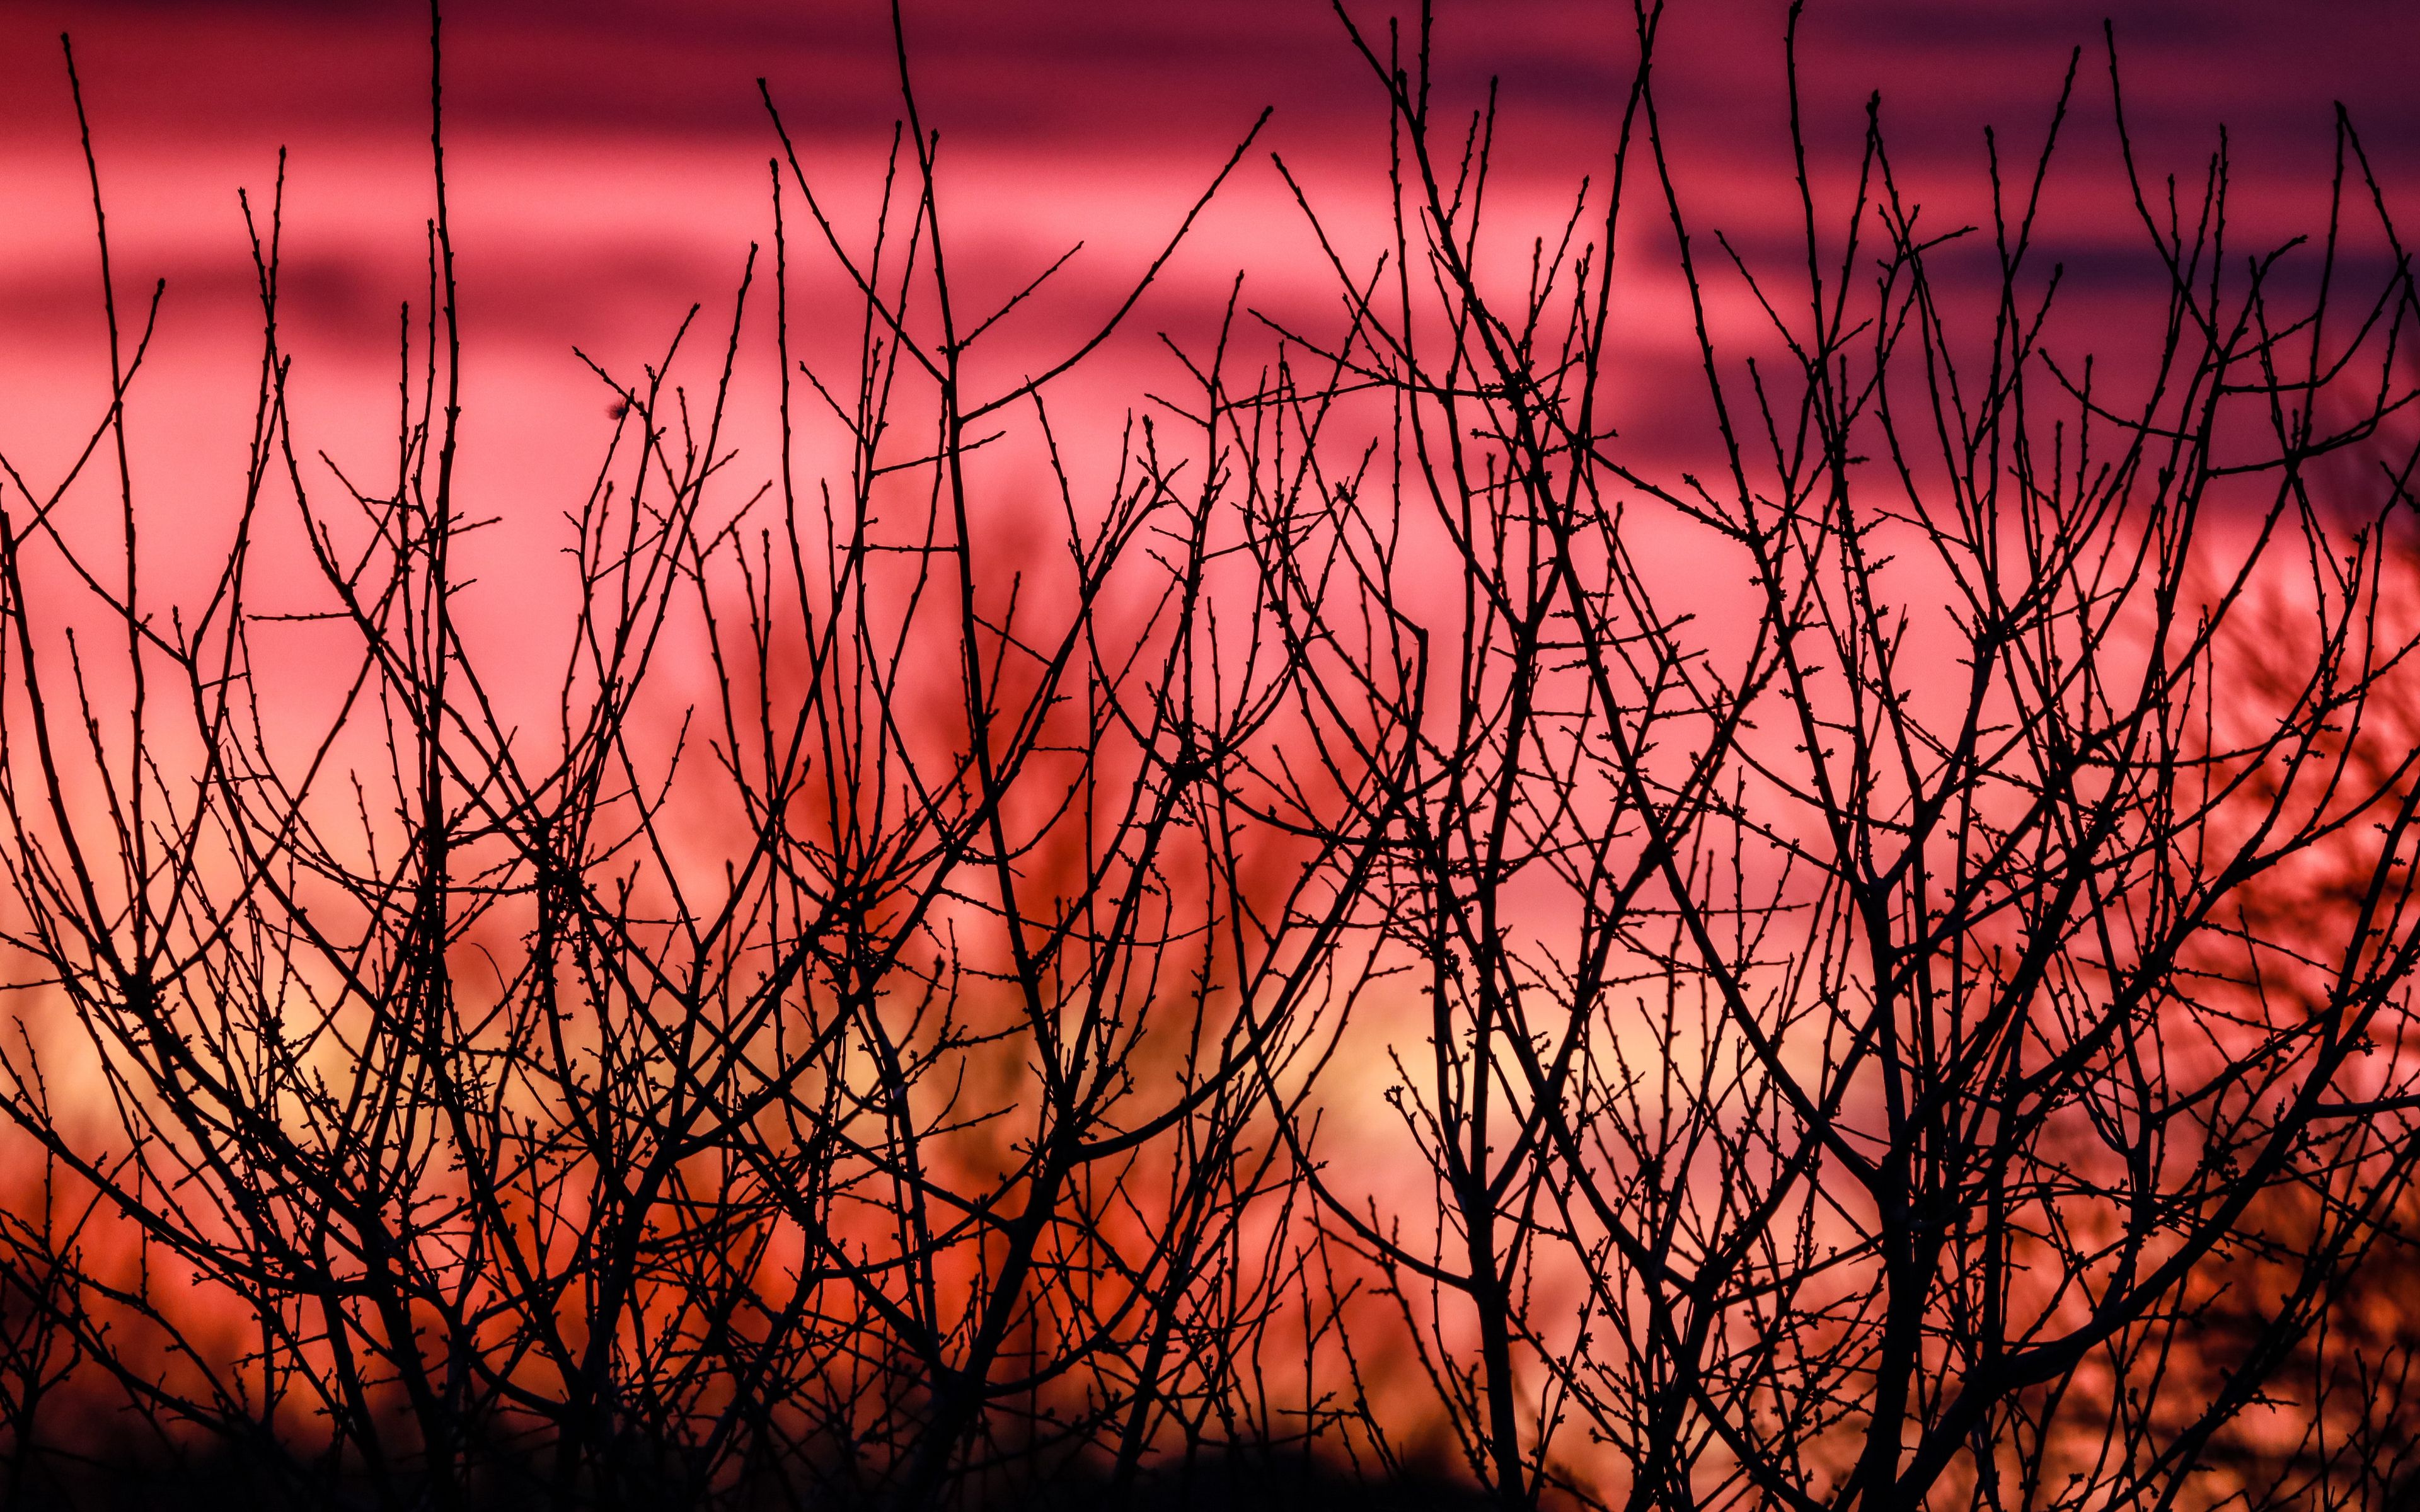 Download wallpaper 3840x2400 branches, silhouettes, sunset, nature 4k